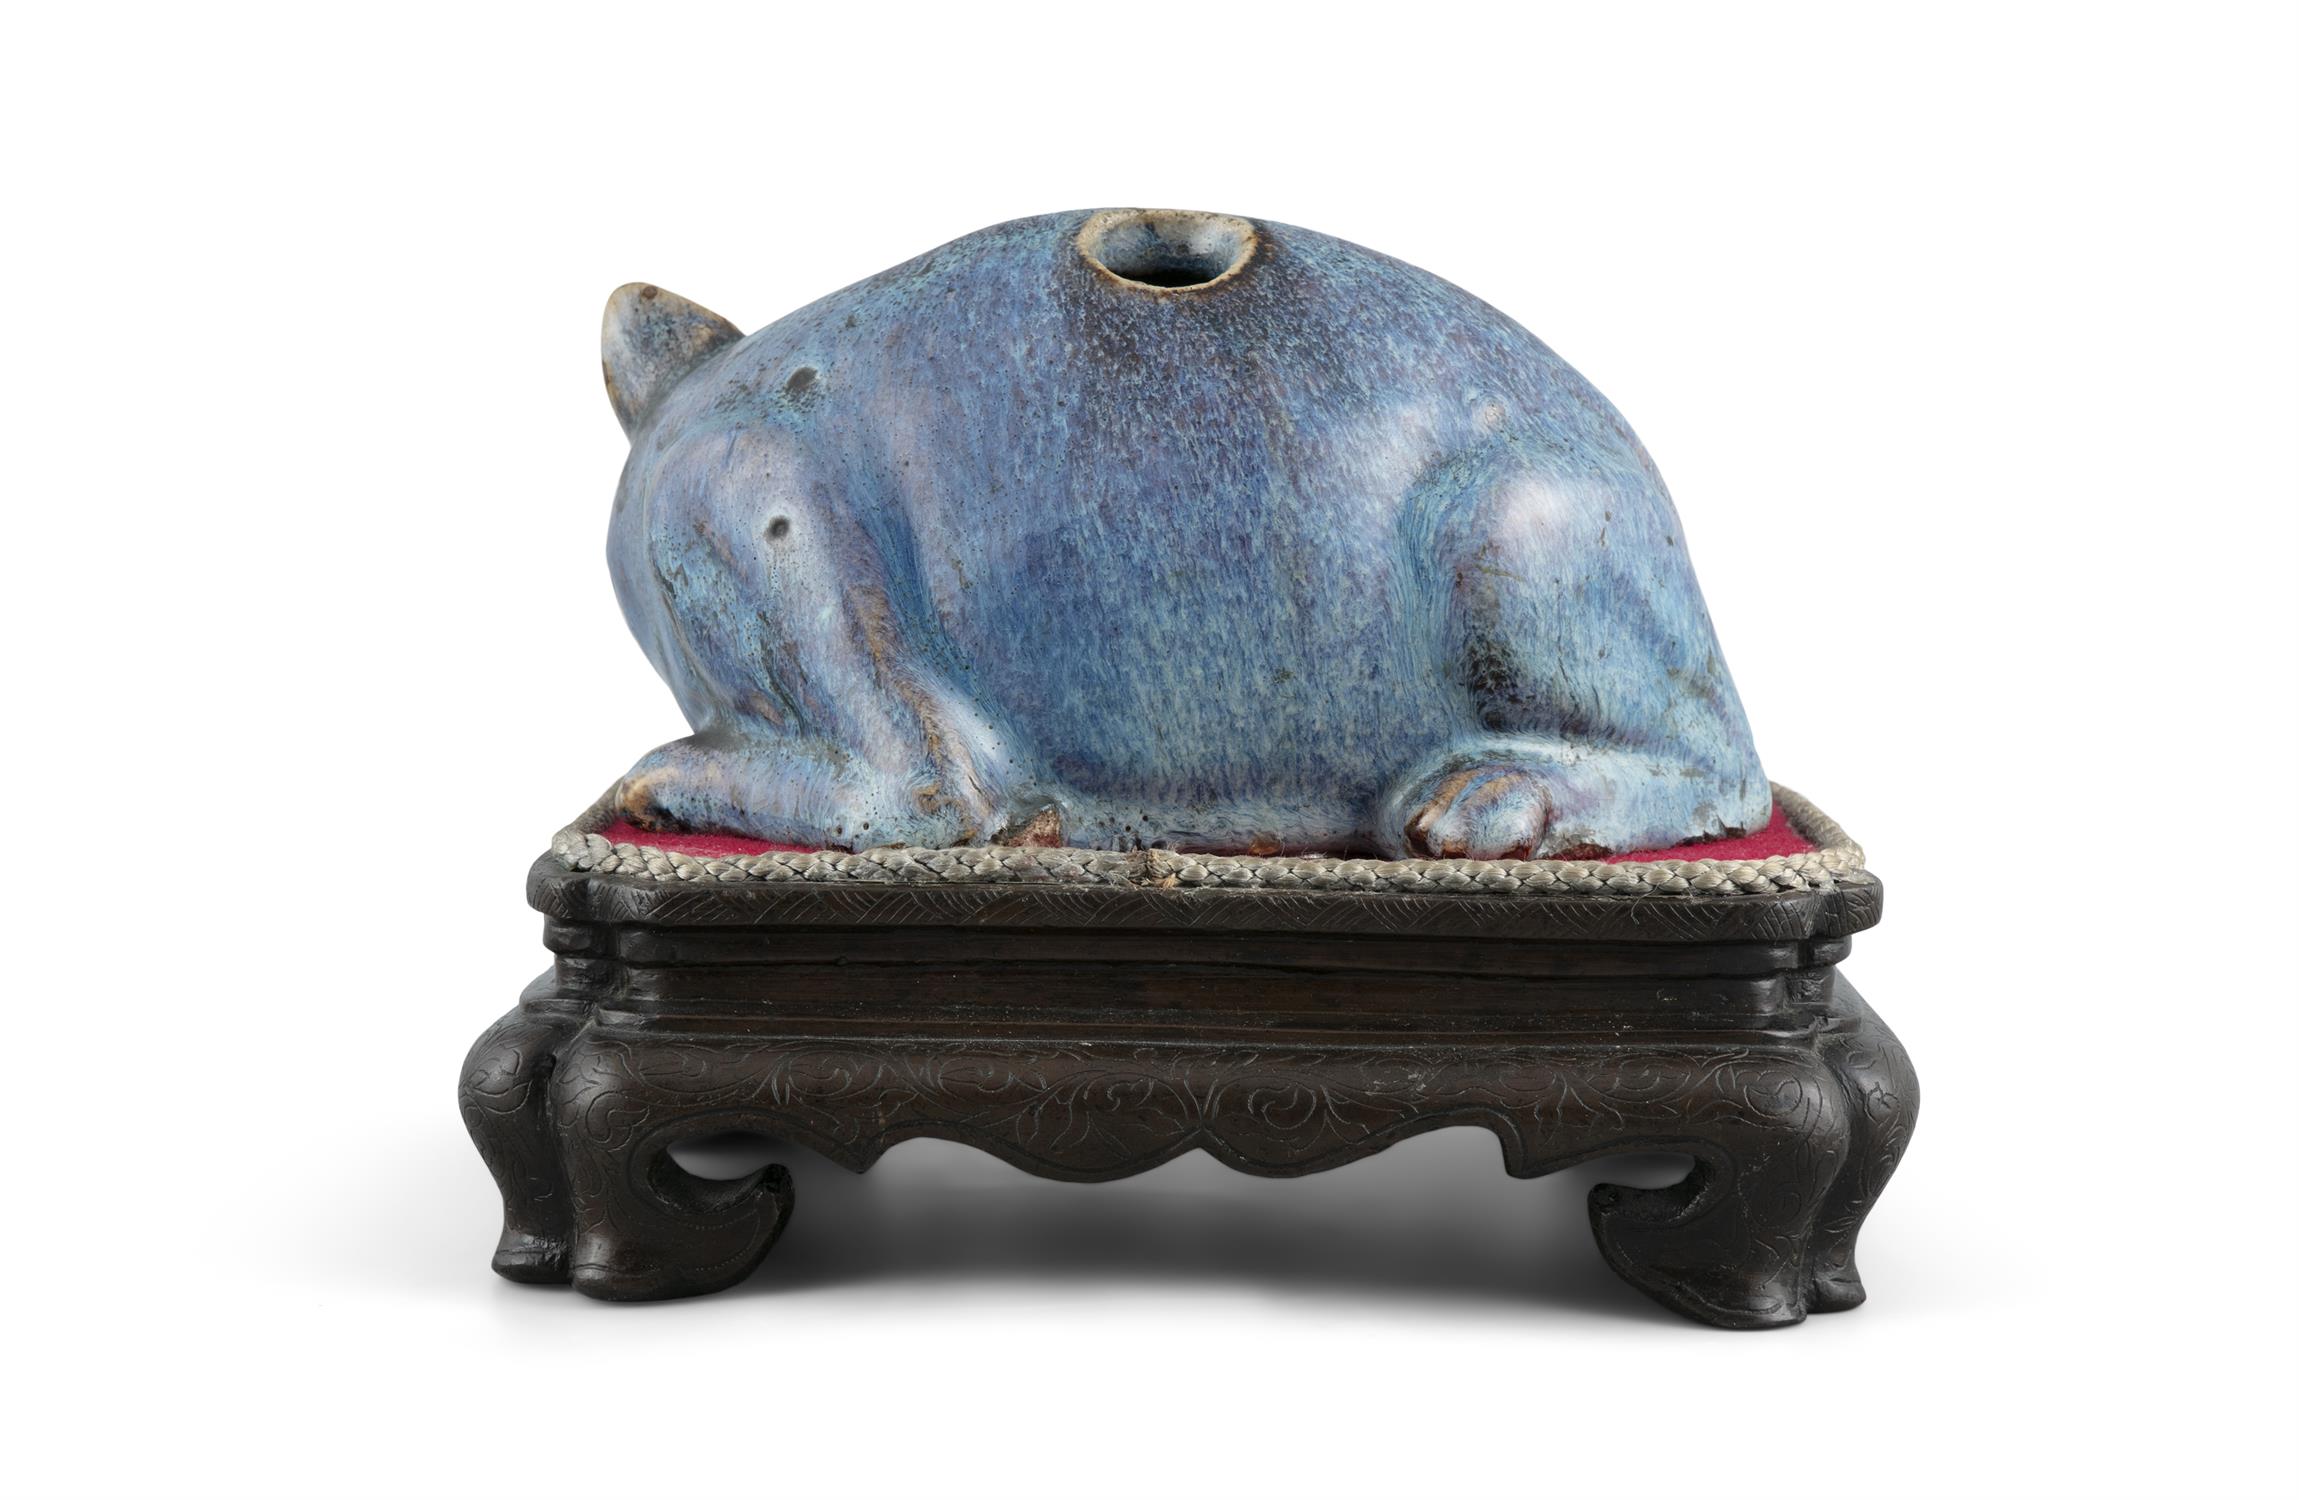 A ROBIN EGG PORCELAIN CAT NIGHT LIGHT China, Qing Dynasty Molded as a crouching cat, with a hole - Image 3 of 7